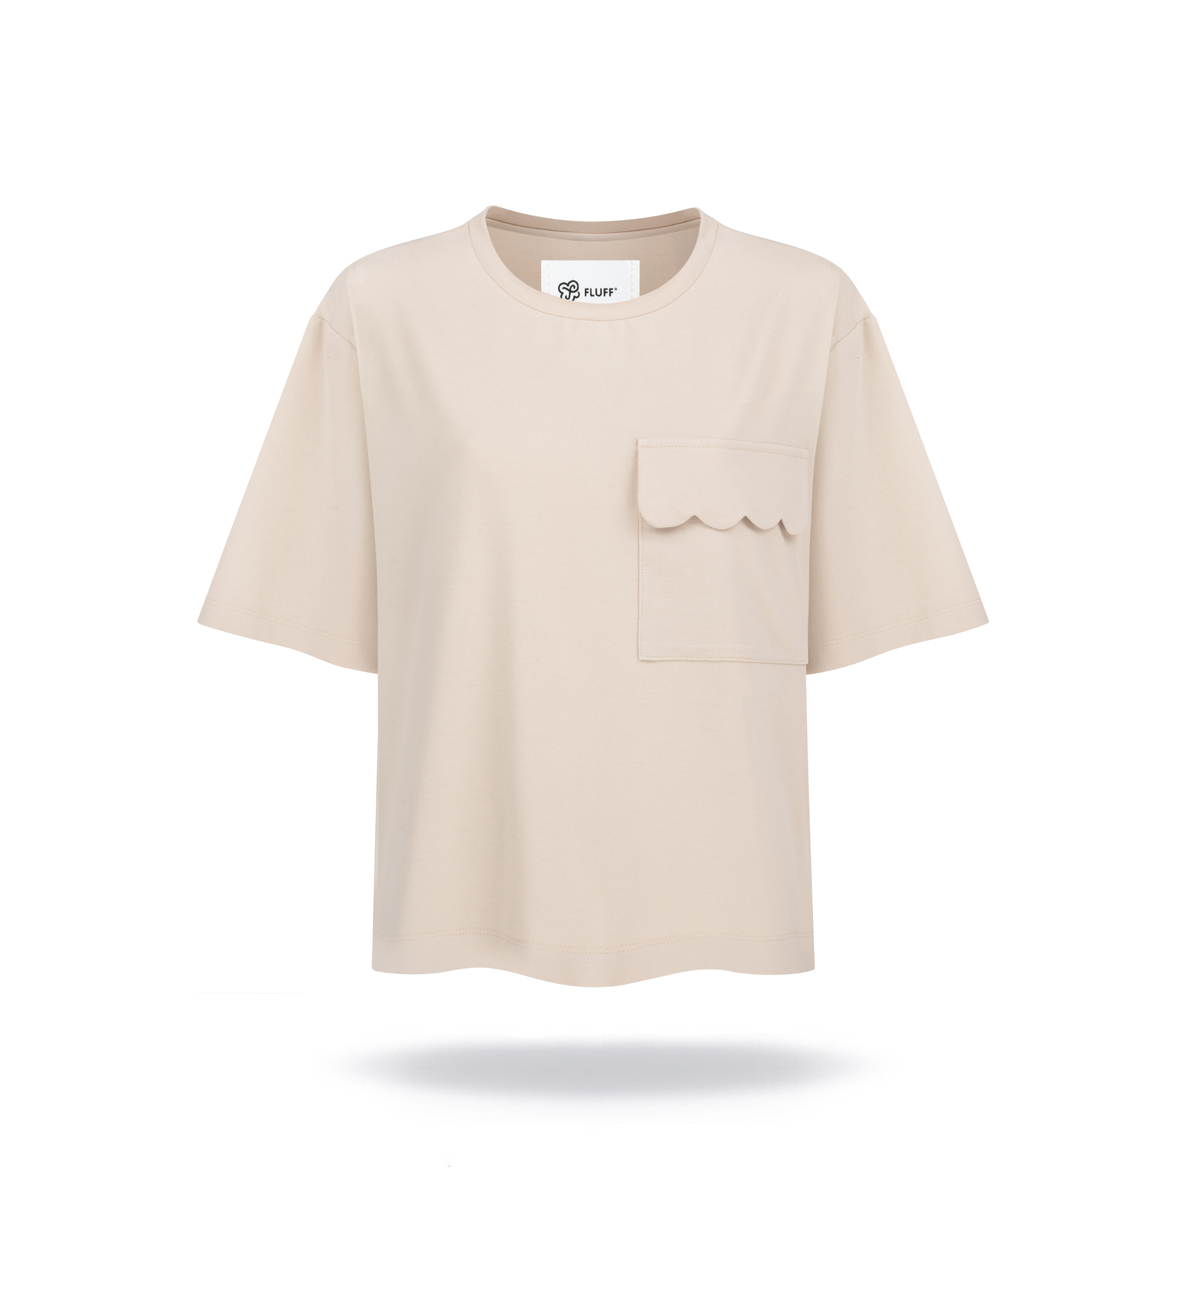 Bamboo t-shirt with round neck, sand beige colour. Loose fit, front pocket with ruffles.